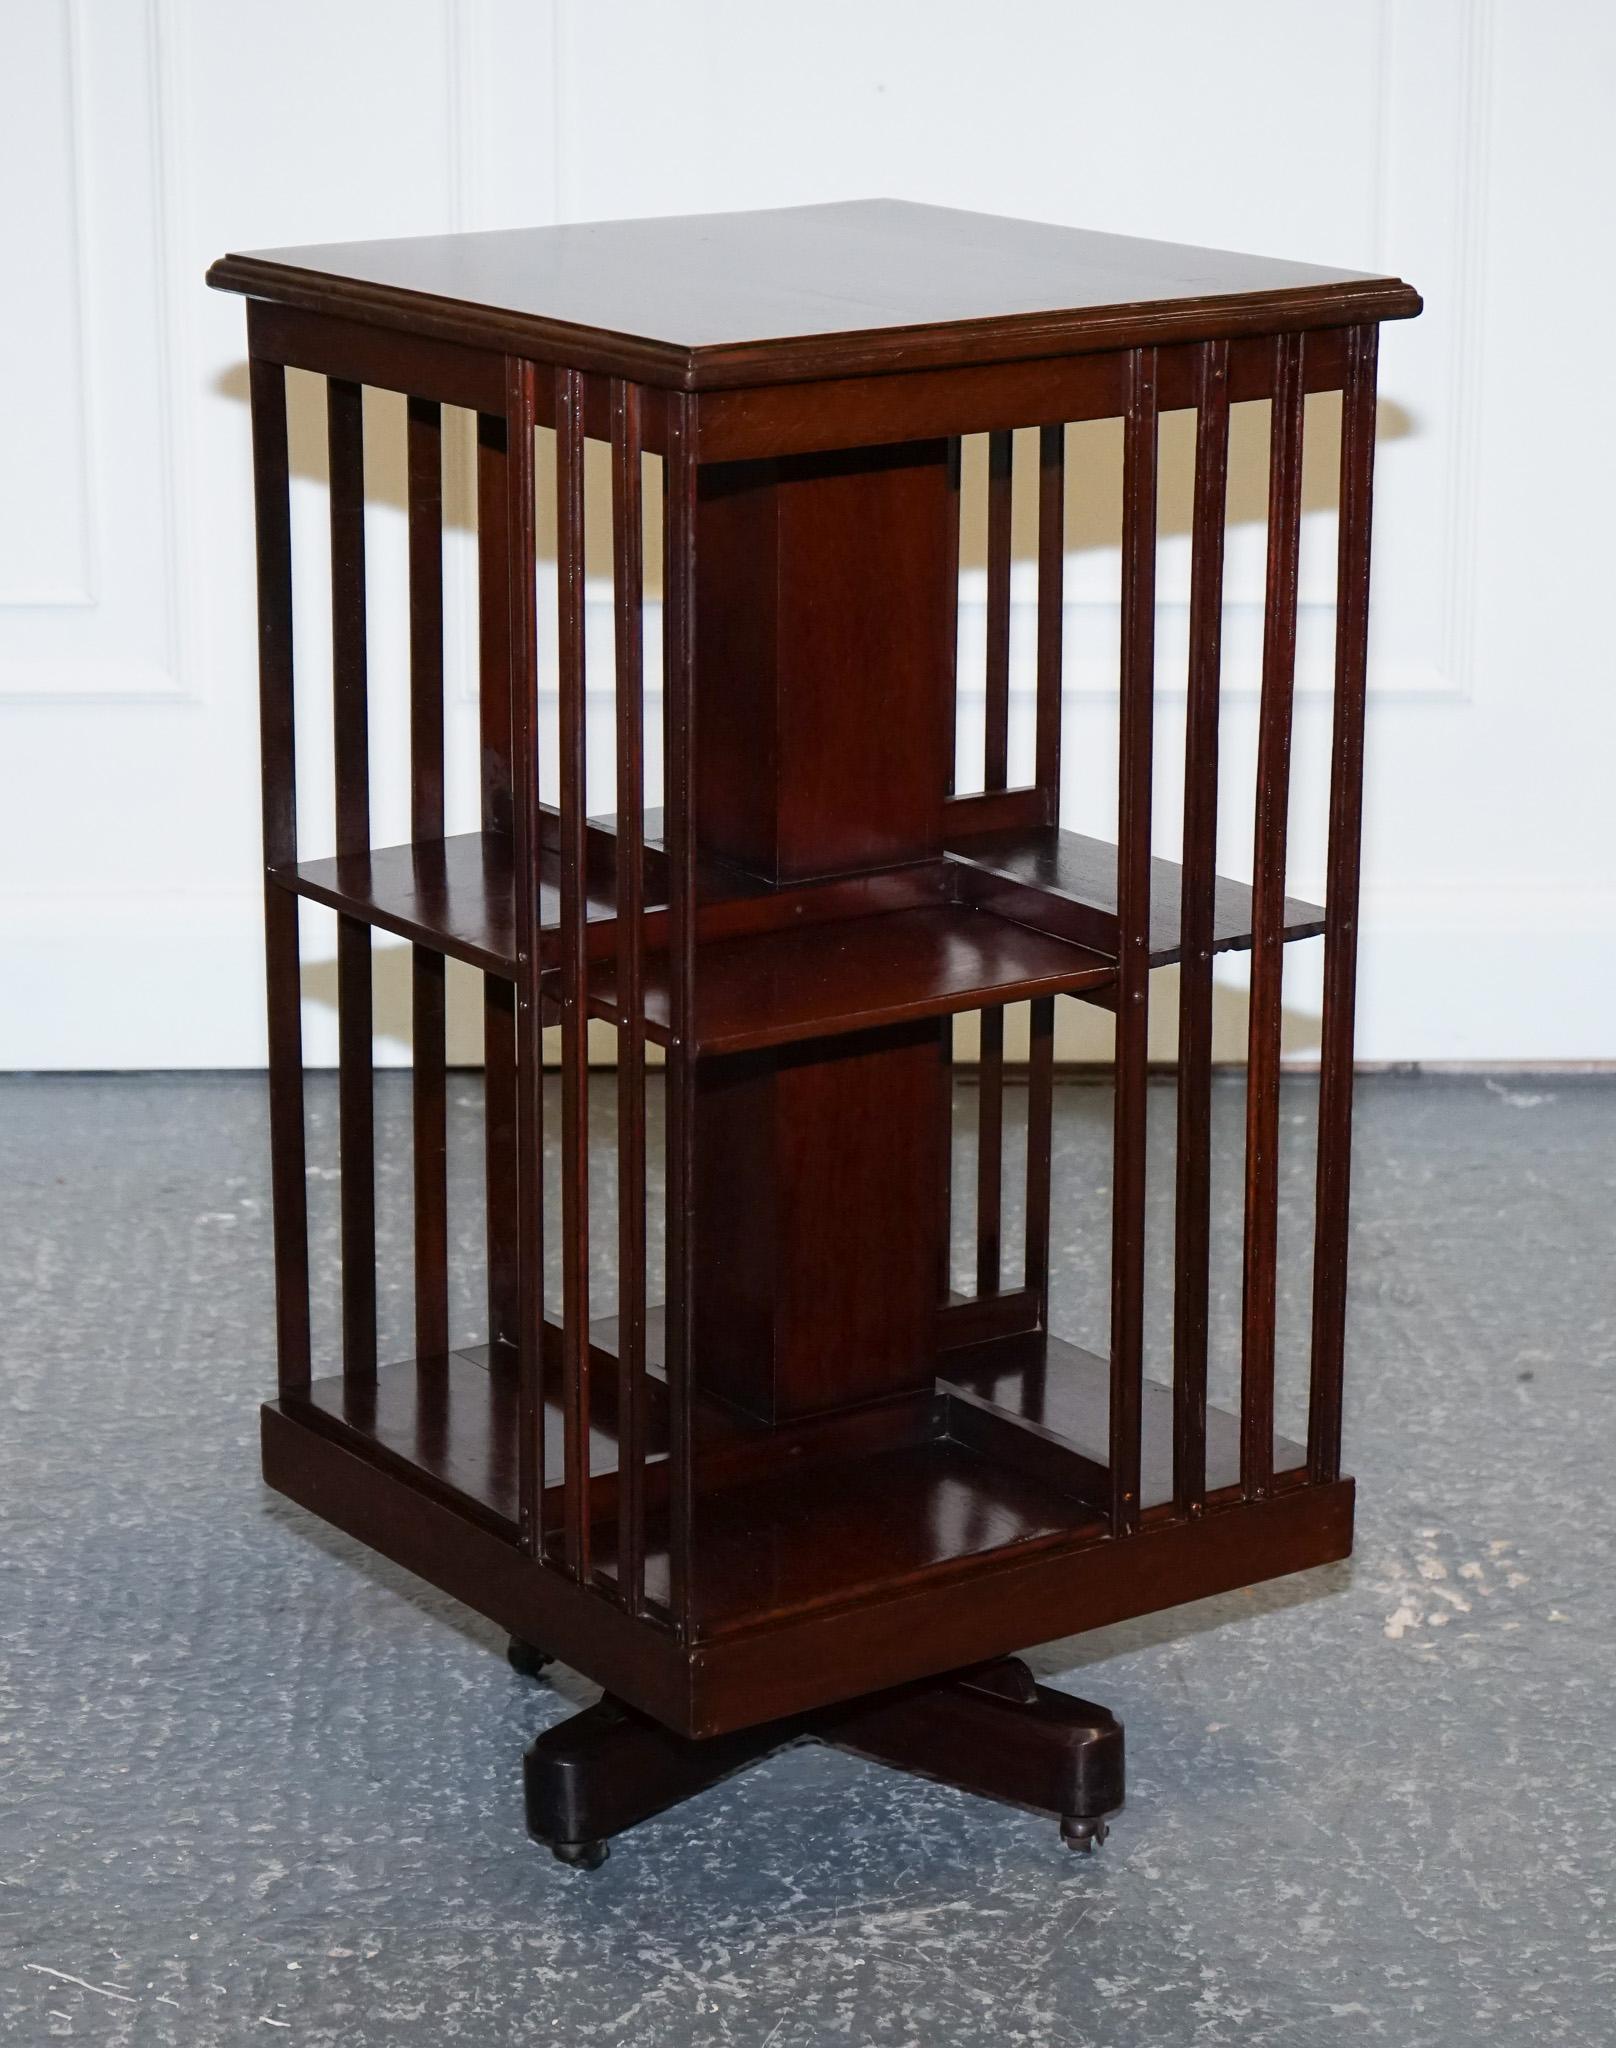 Edwardian Inlaid Sheraton Revival Two Tier Revolving Bookcase In Good Condition For Sale In Pulborough, GB